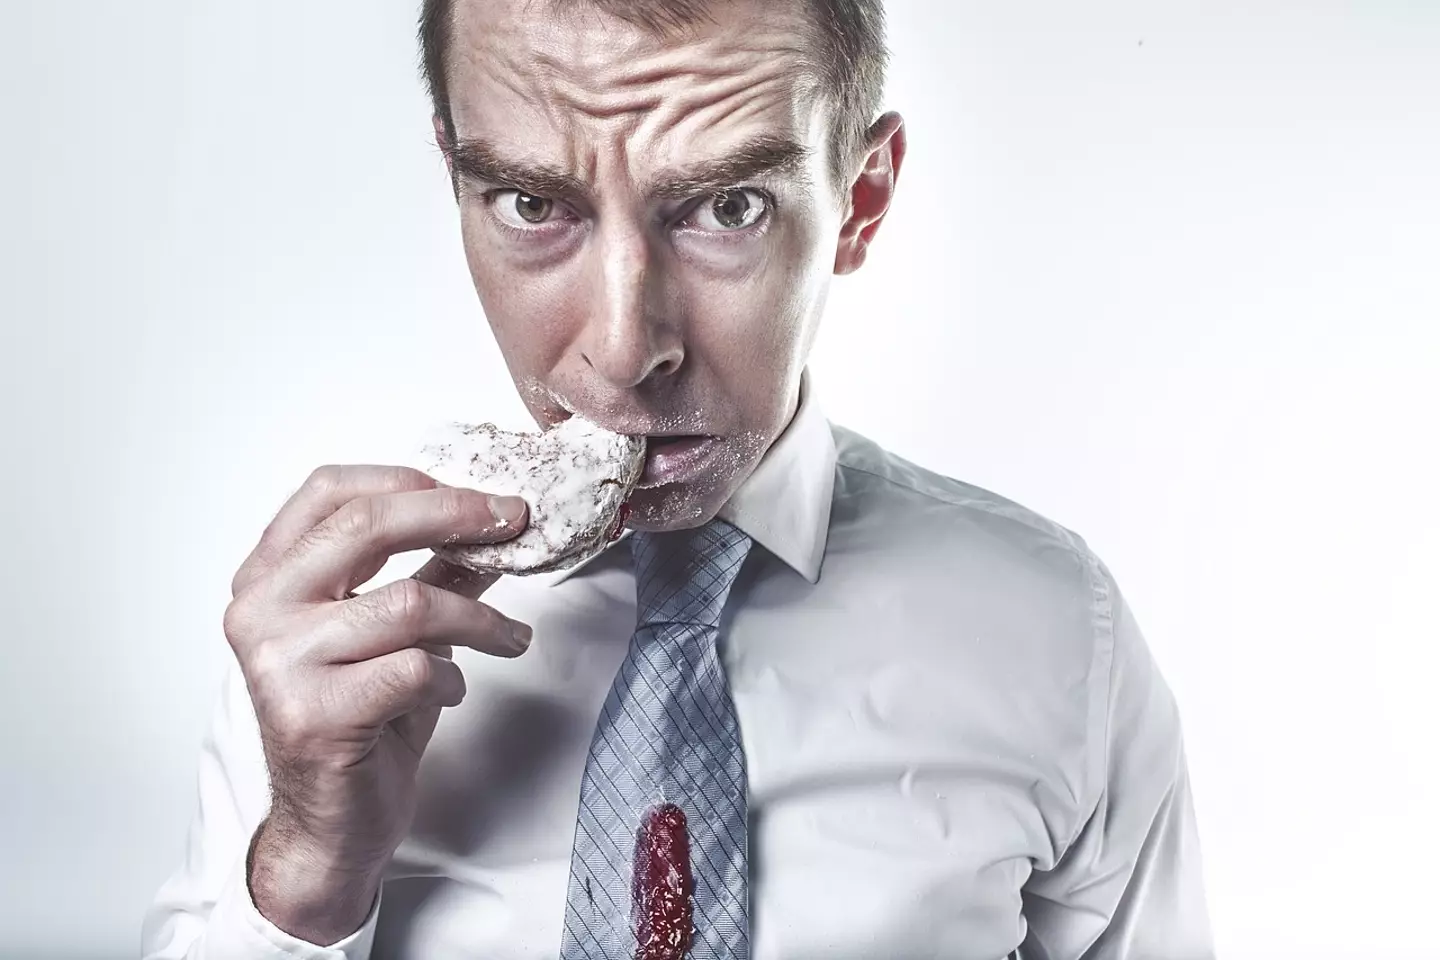 Does the sound of people eating make you angry?